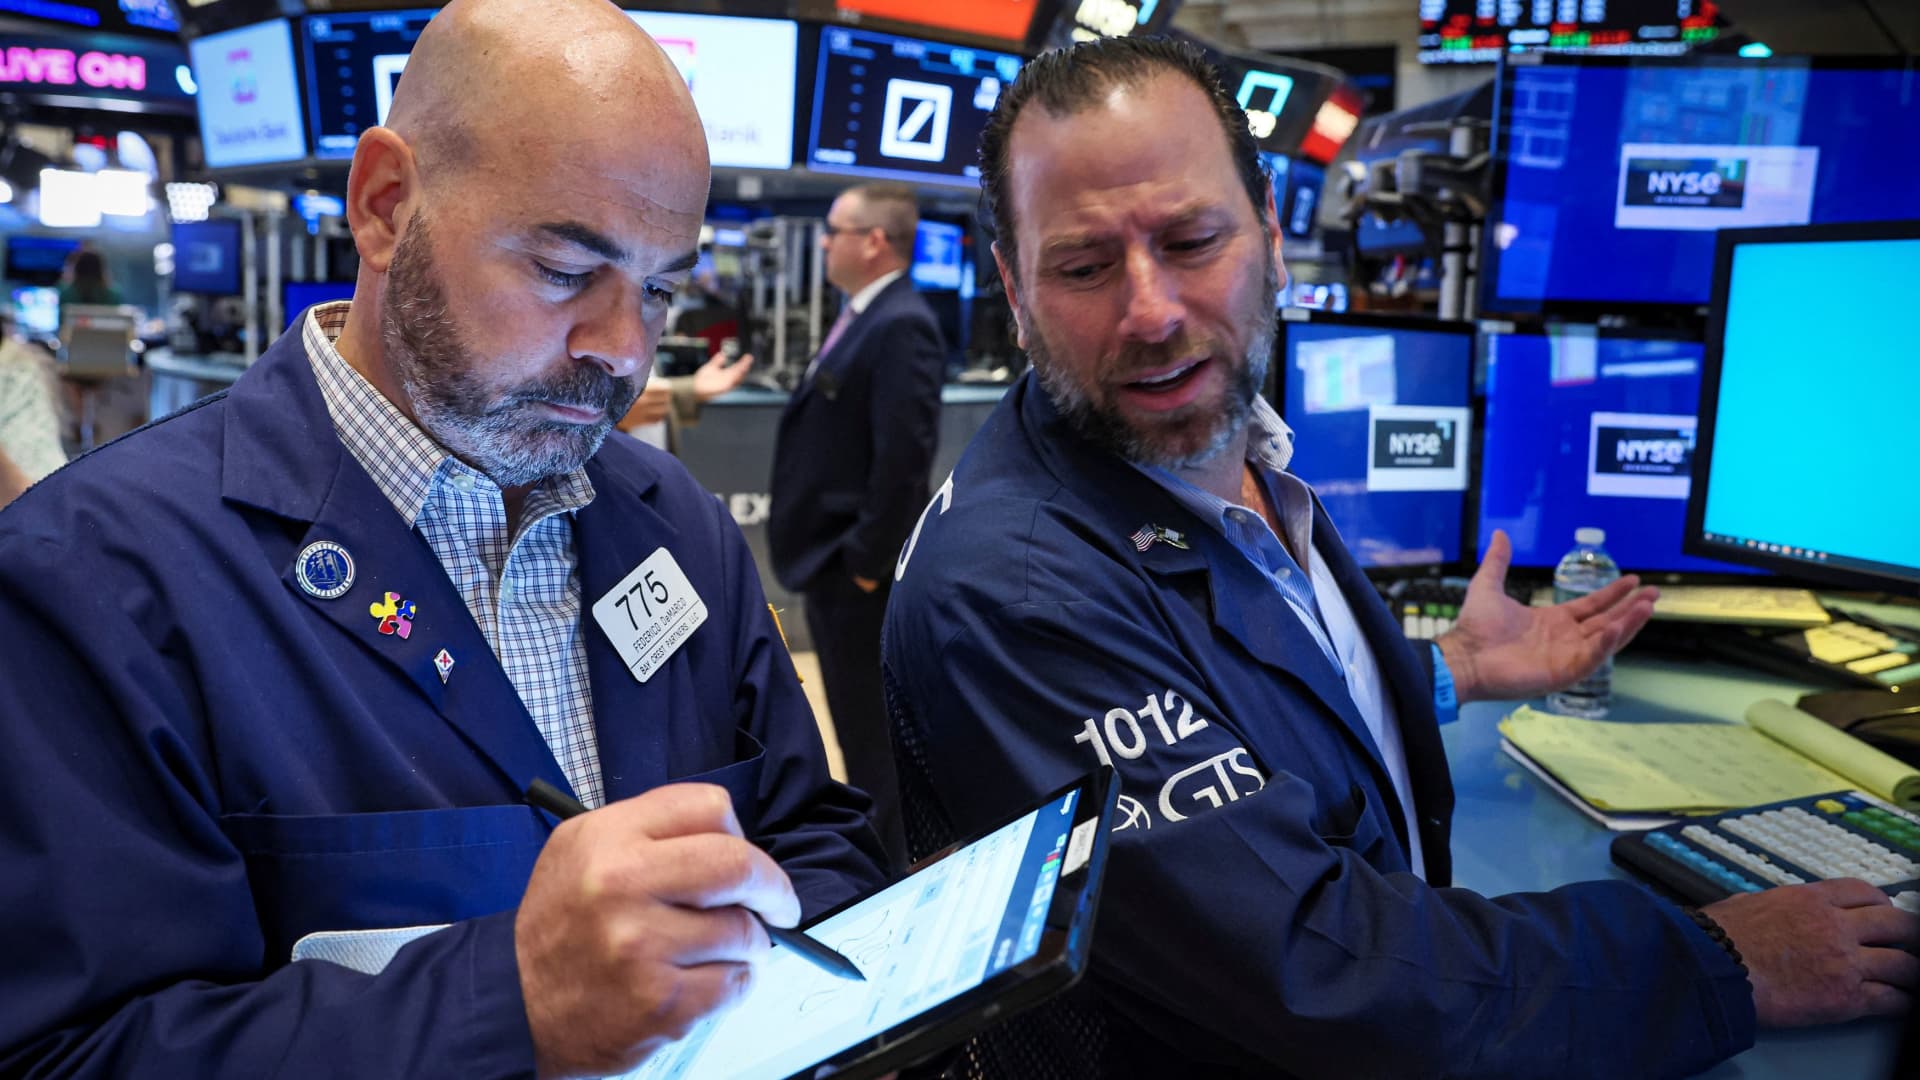 Top Wall Street strategists see the stock market recouping most of its losses into the year-end